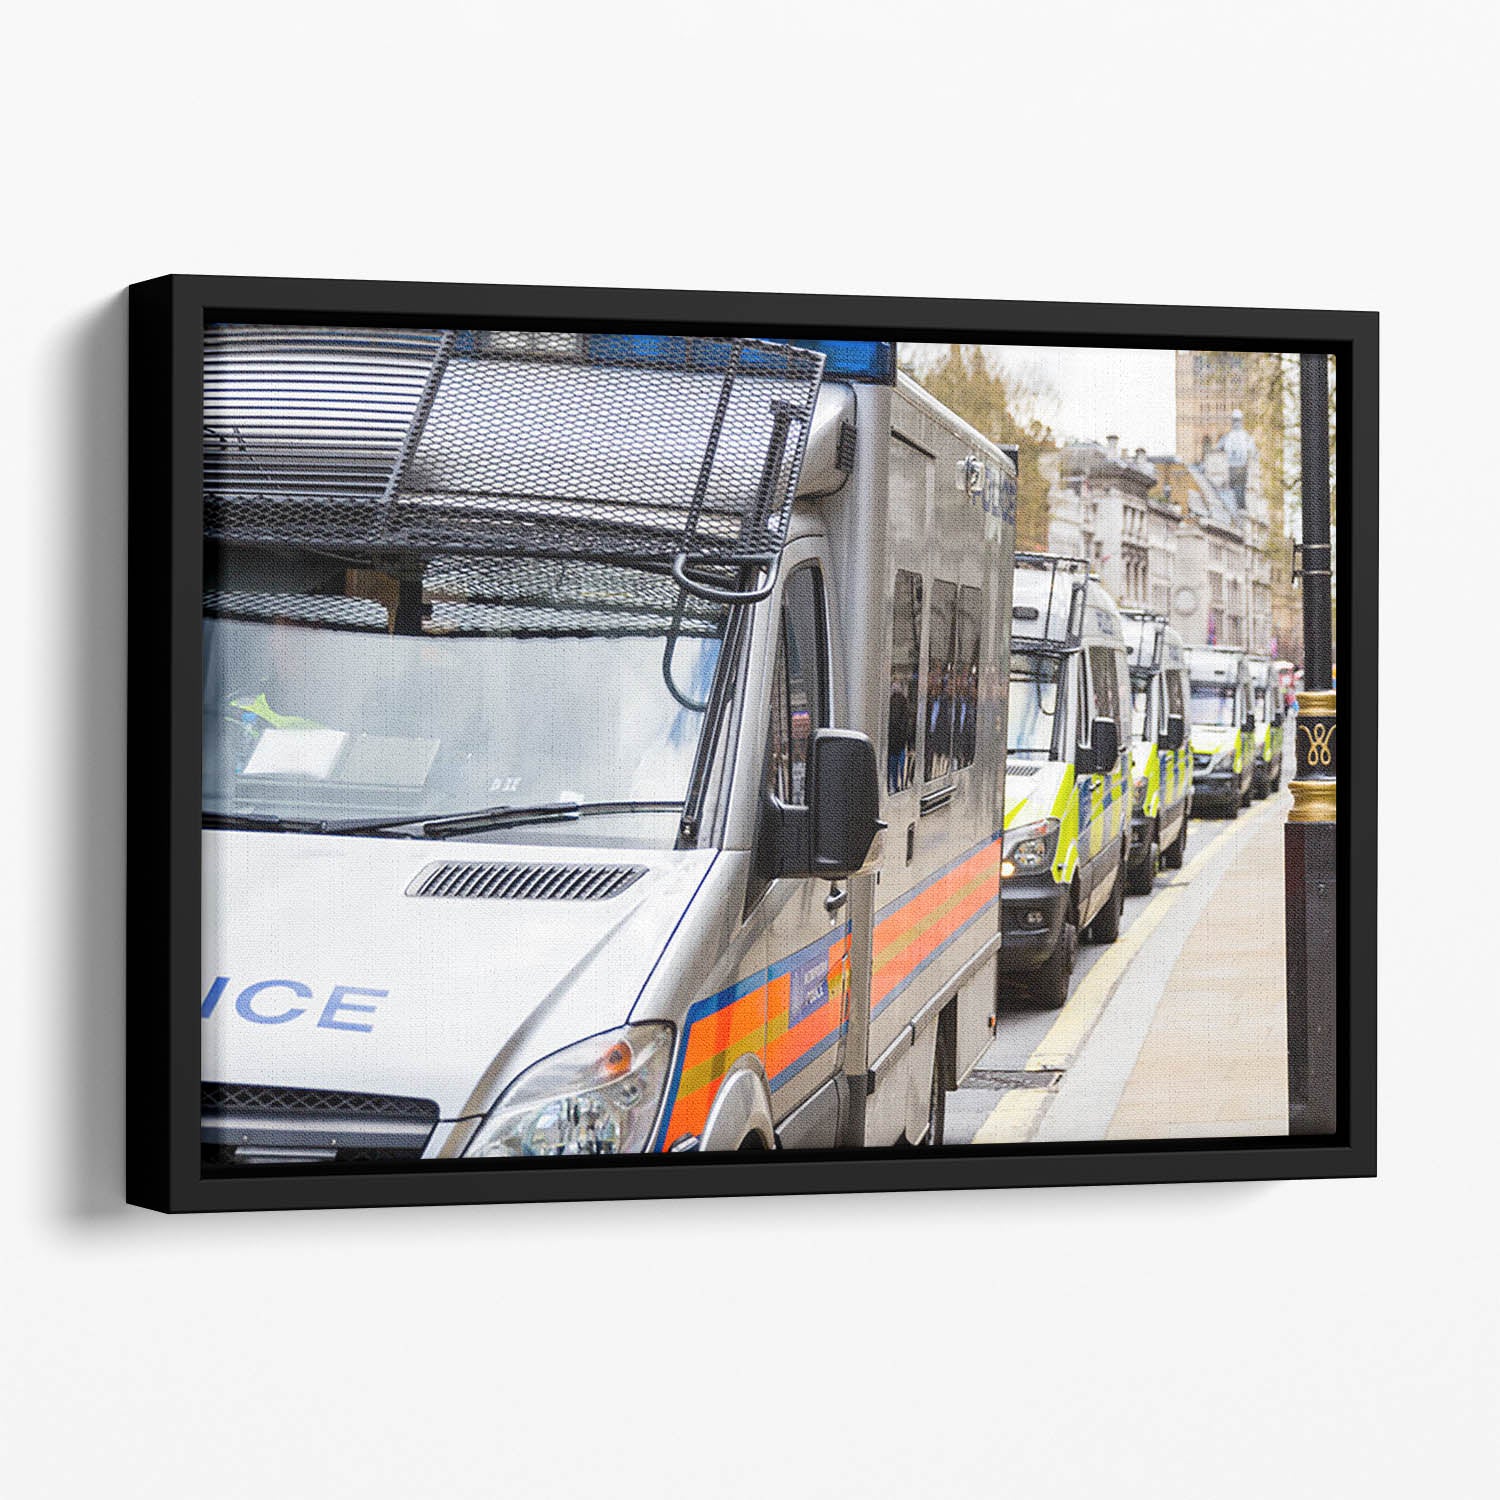 Police vans in a row Floating Framed Canvas